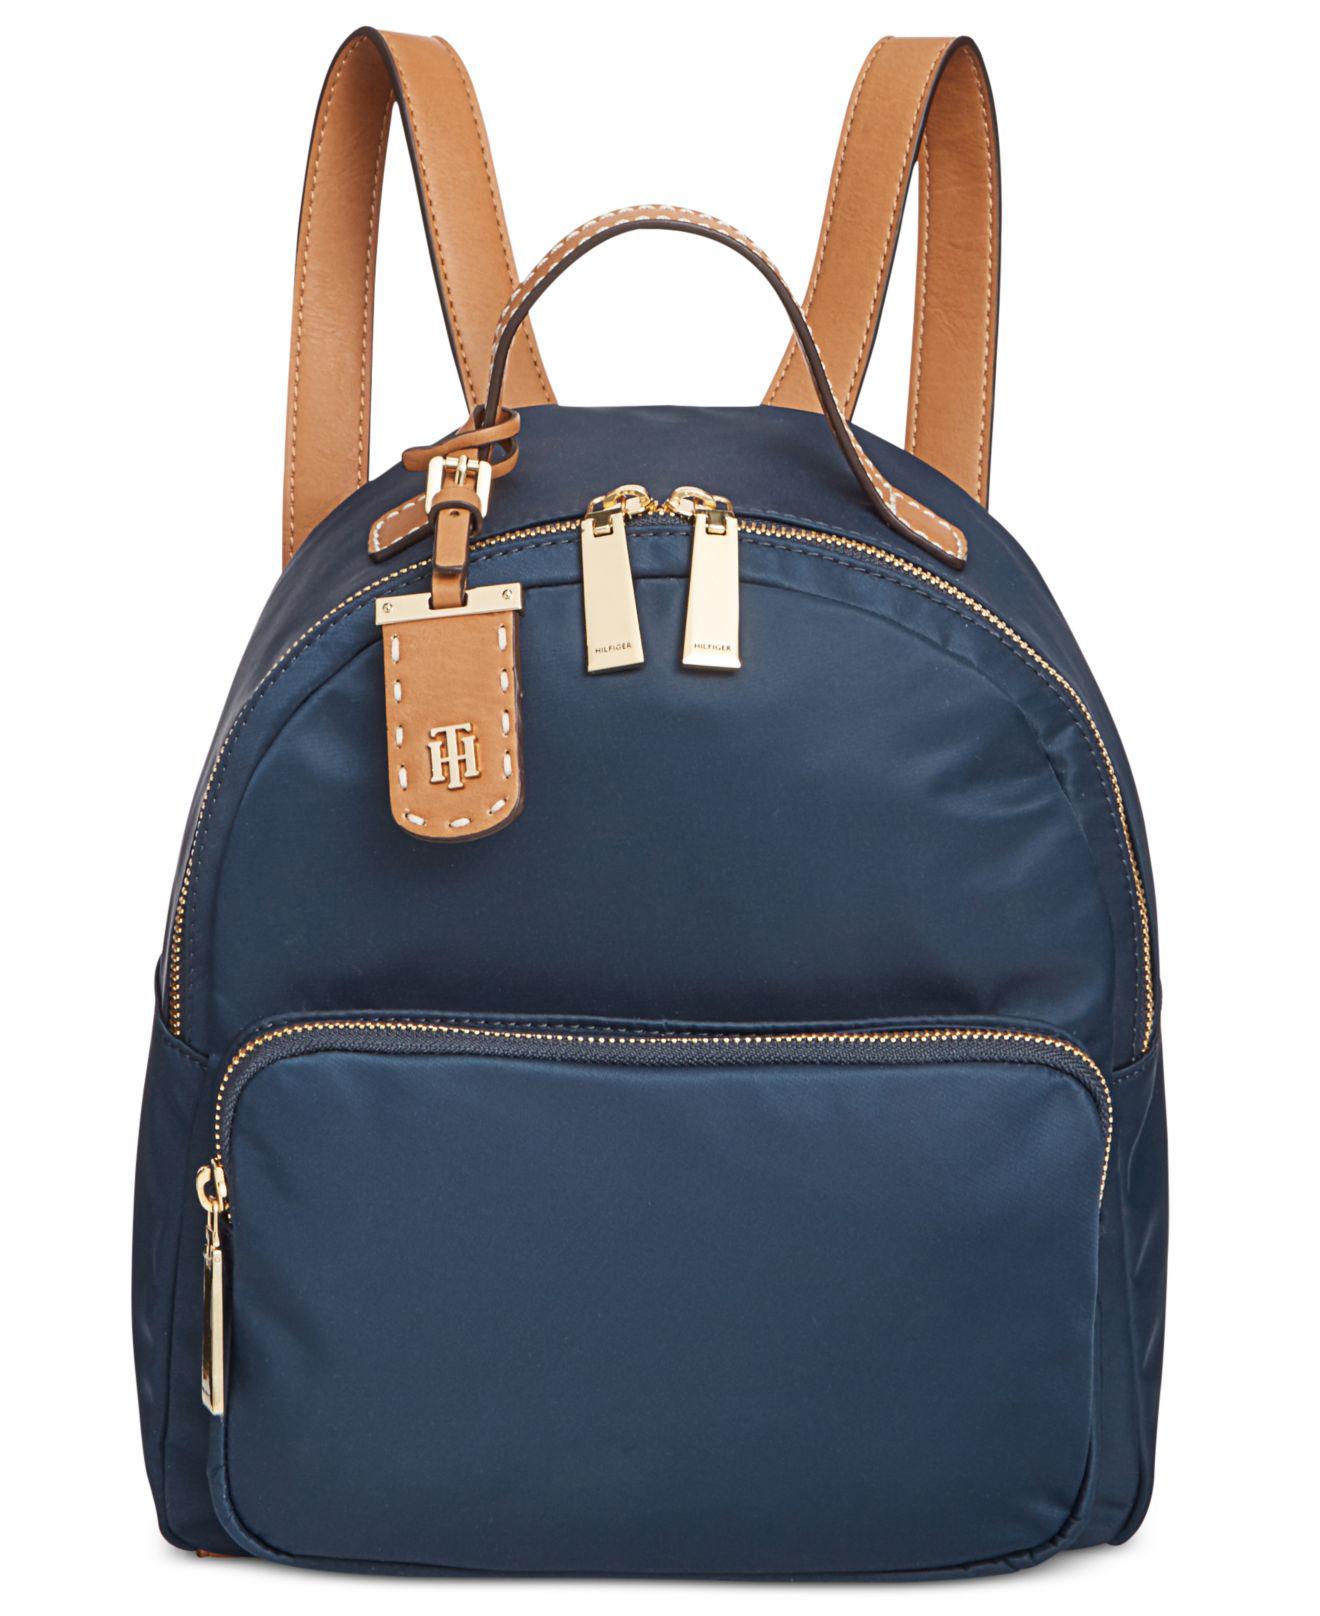 Tommy Hilfiger Julia Small Dome Backpack in Navy/Gold (Blue) - Lyst